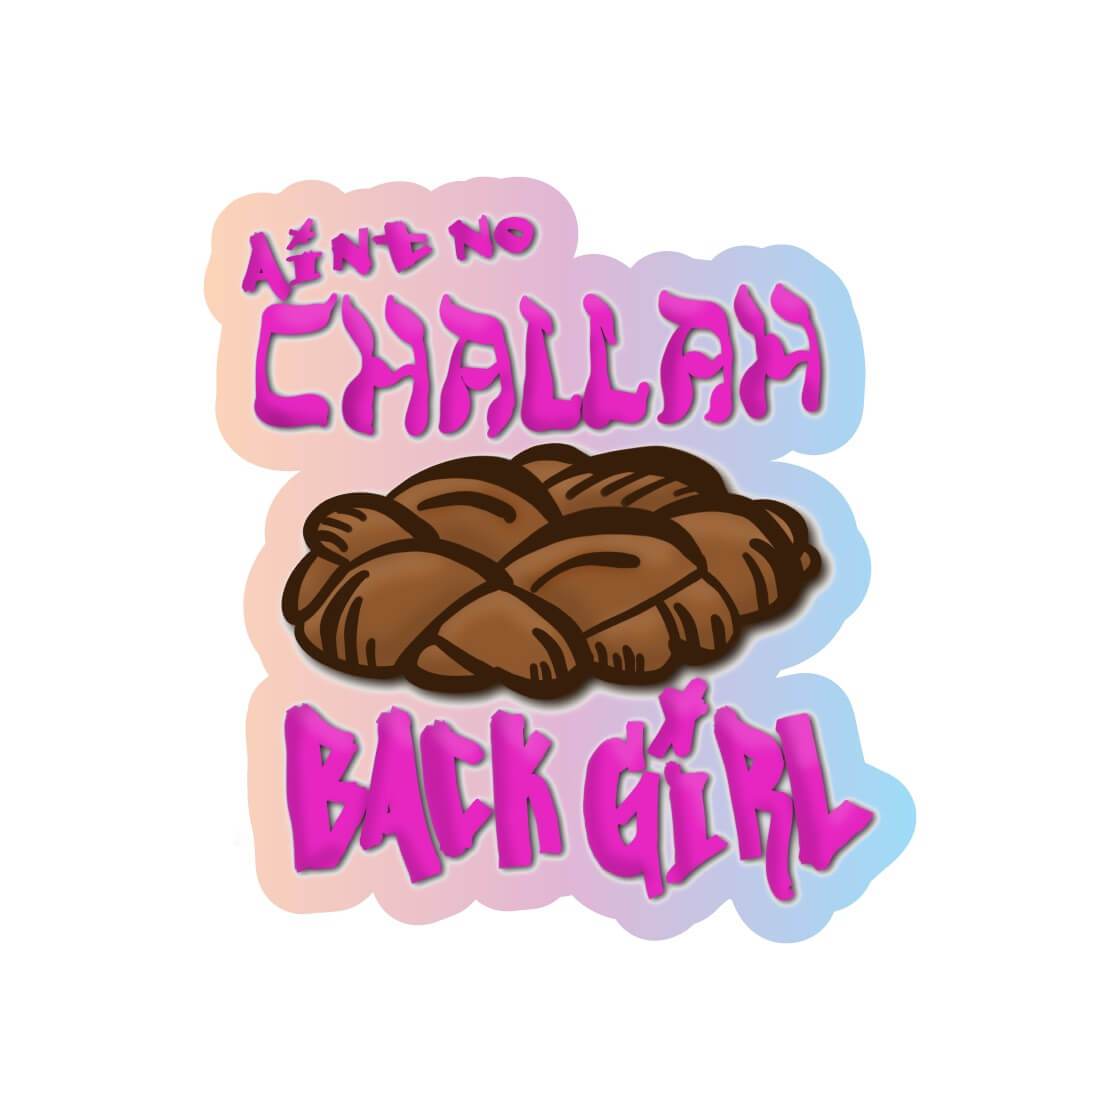 Challah Back Girl Holographic Sticker